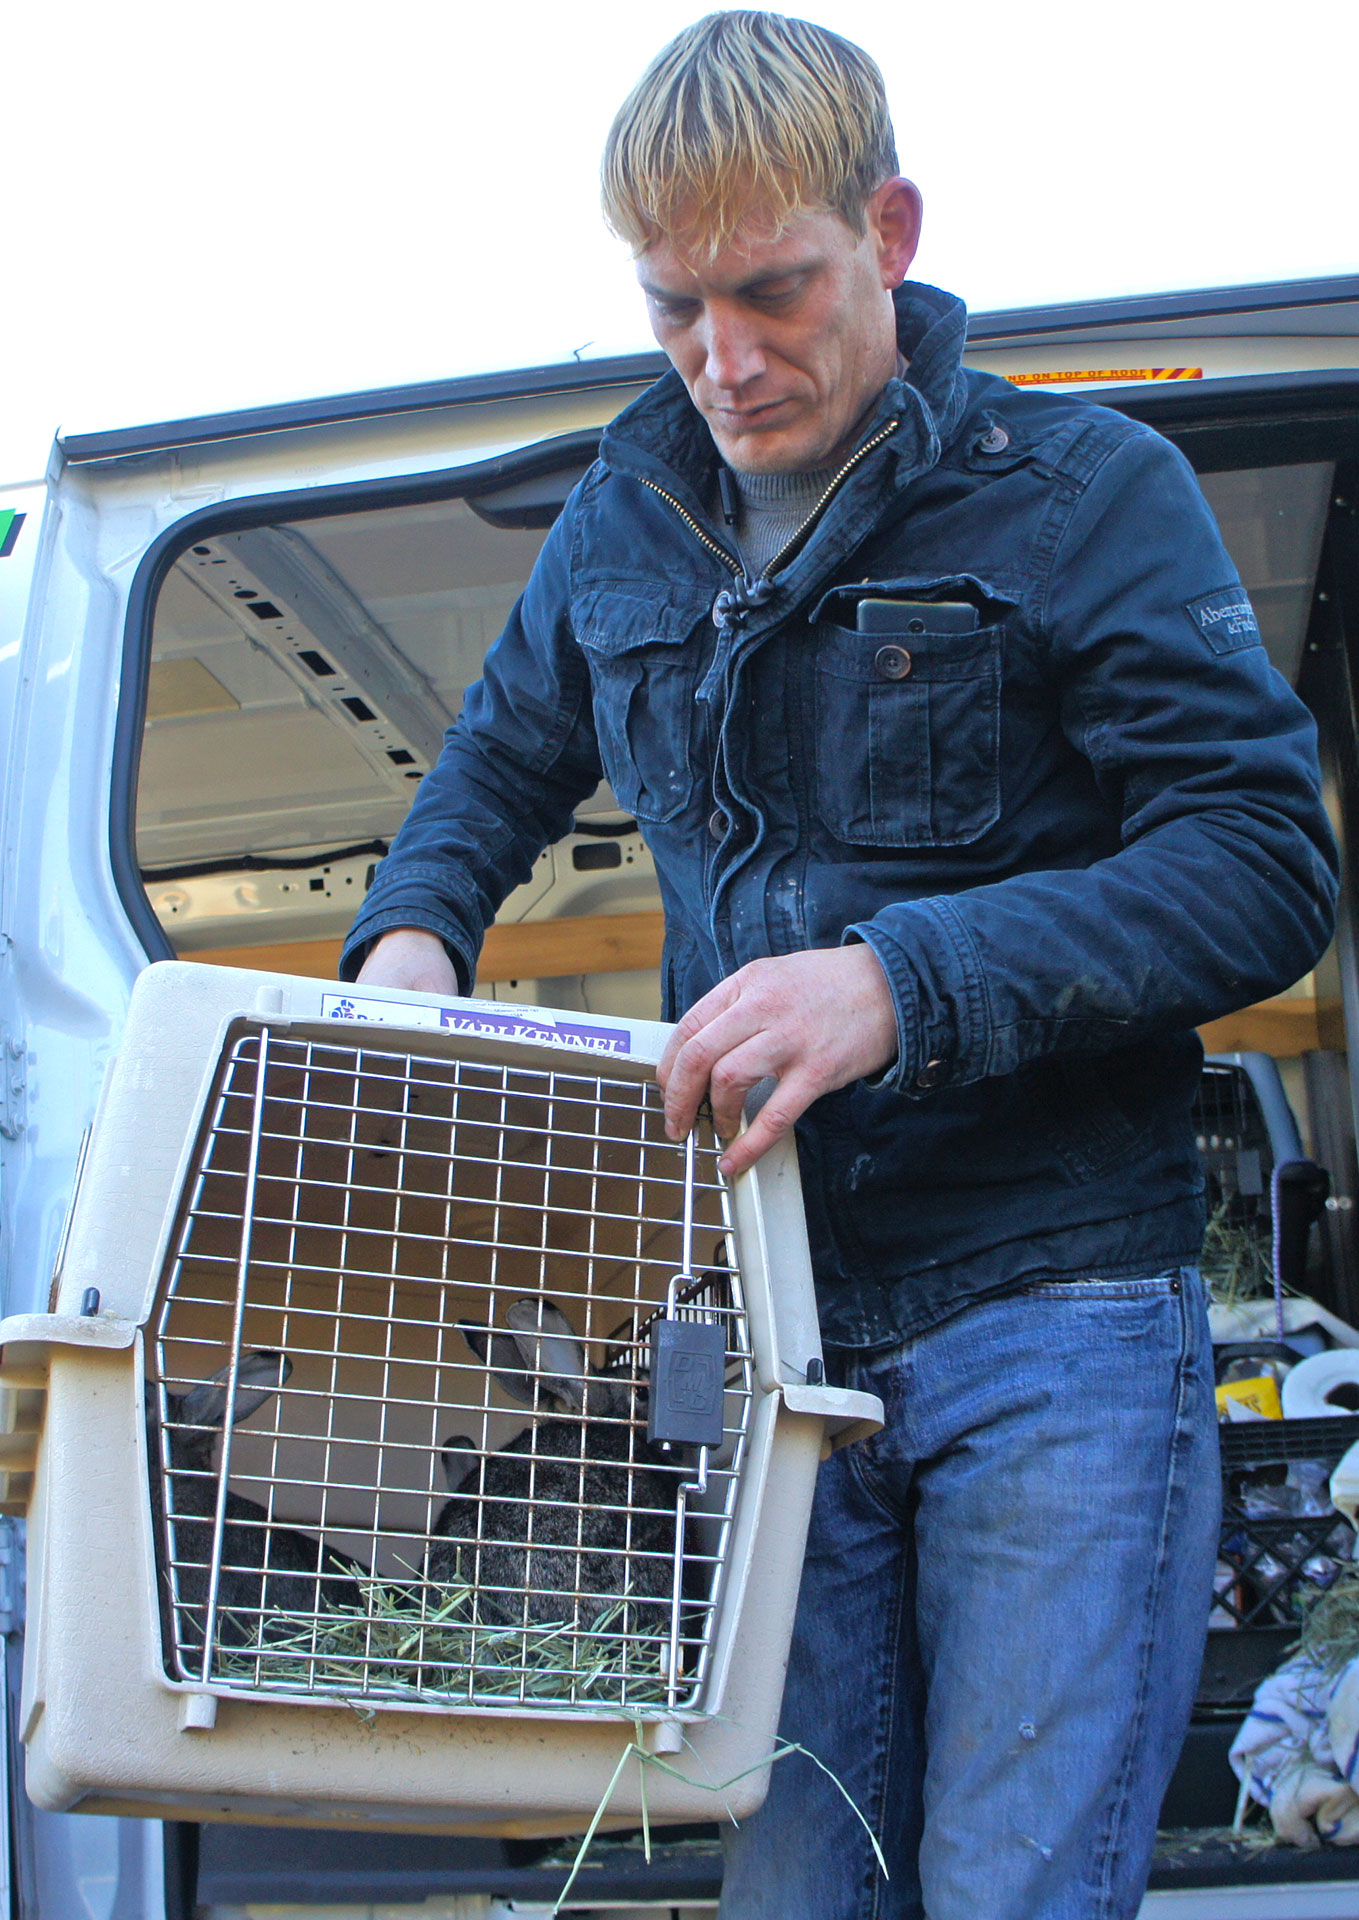 Ken holding a carrier containing two rabbits